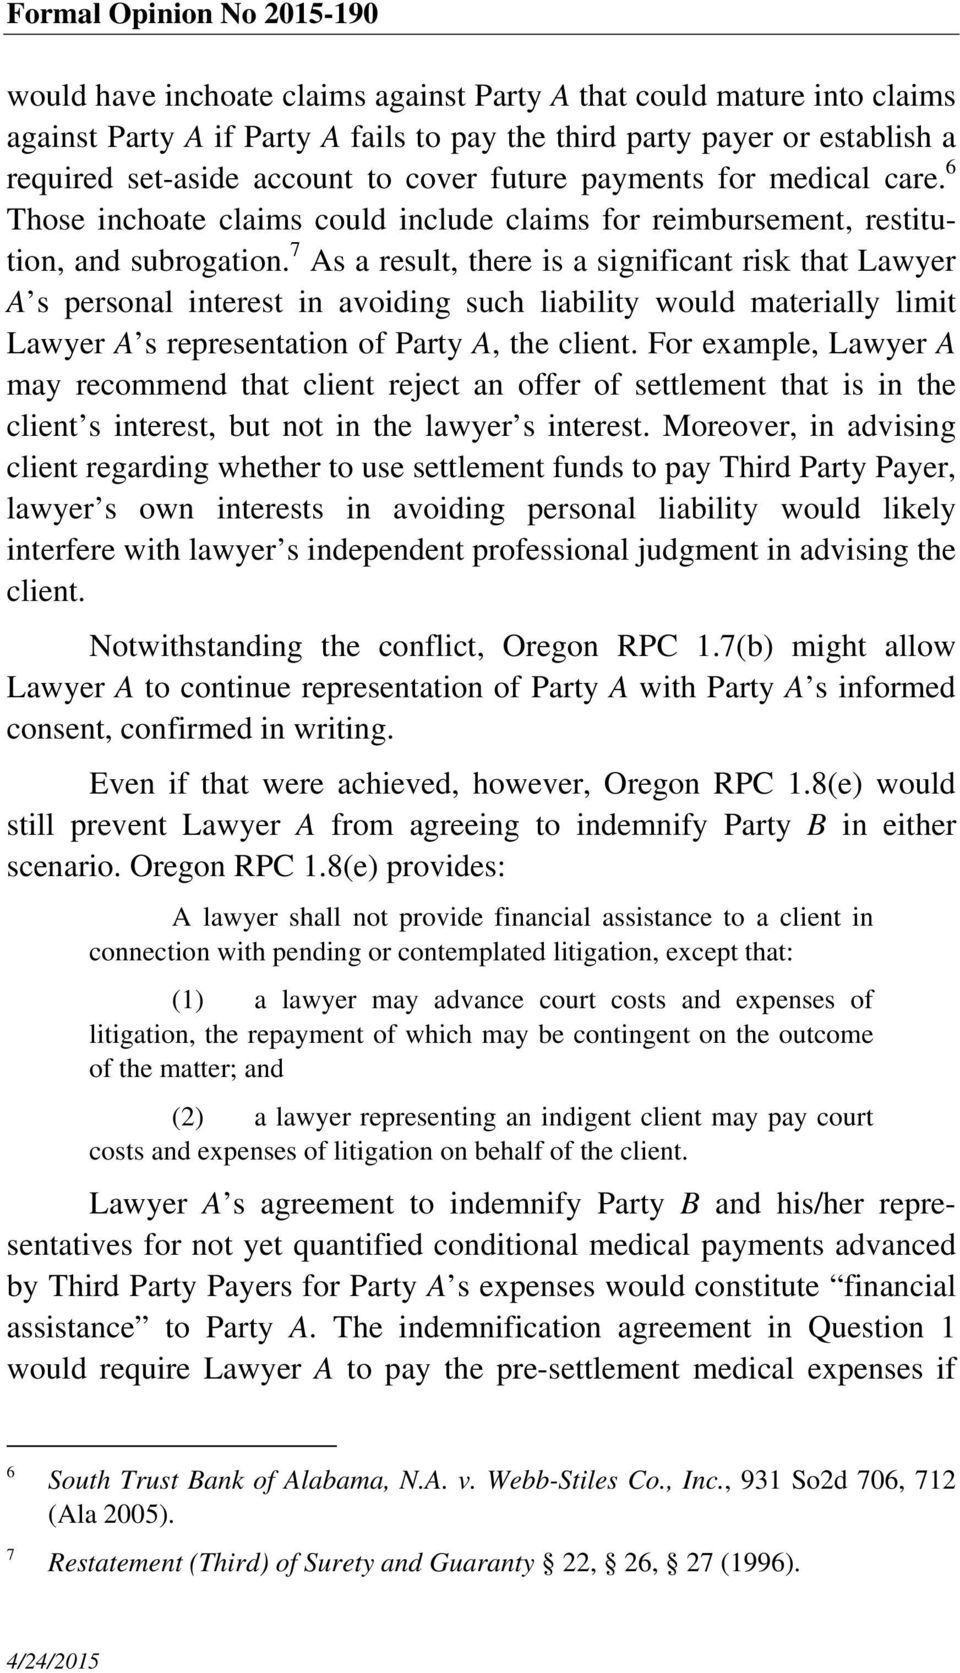 7 As a result, there is a significant risk that Lawyer A s personal interest in avoiding such liability would materially limit Lawyer A s representation of Party A, the client.